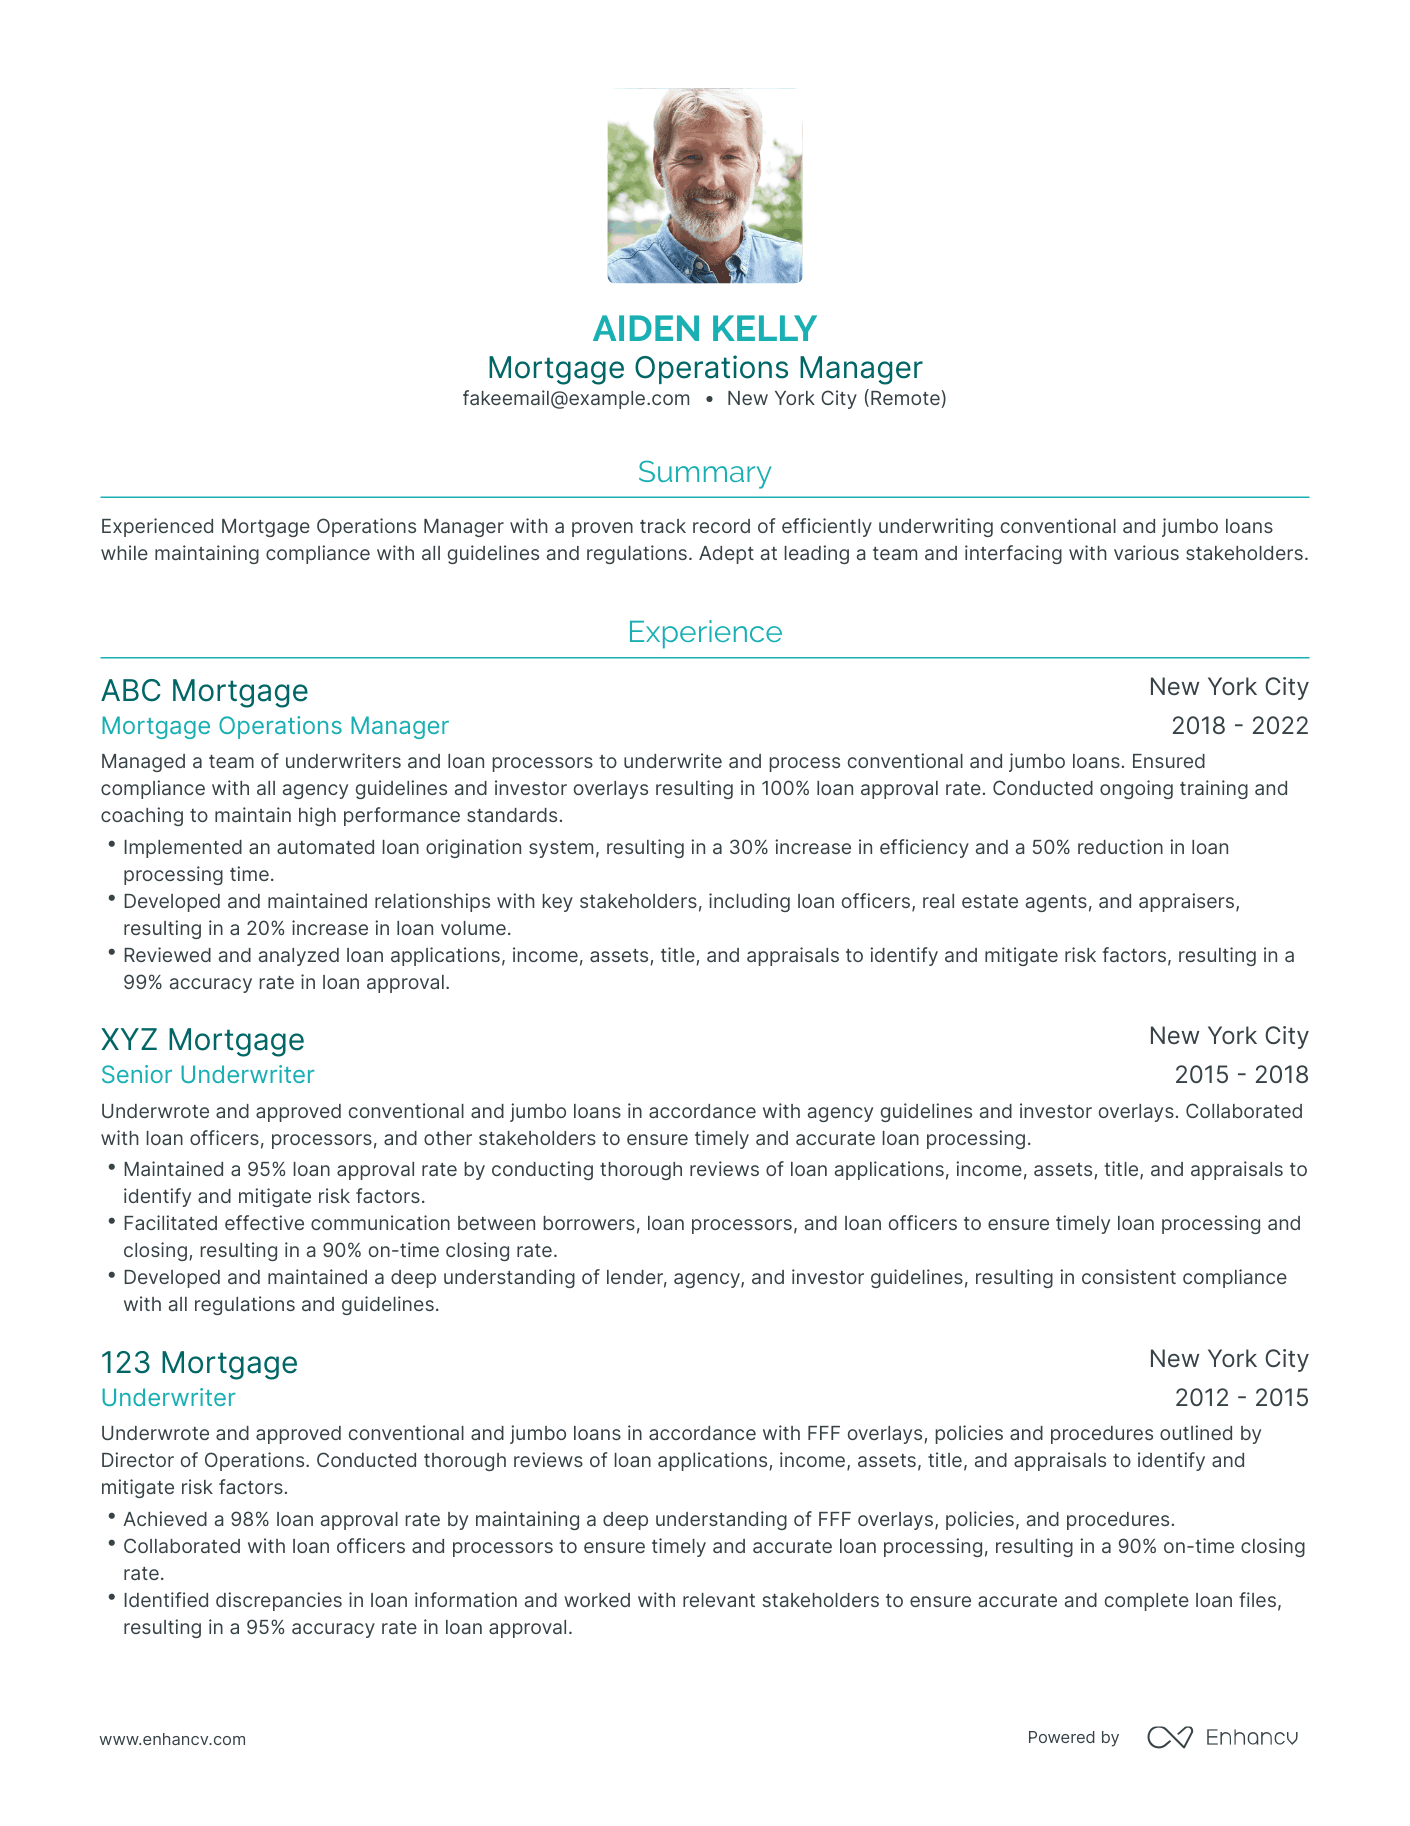 Traditional Mortgage Operations Manager Resume Template